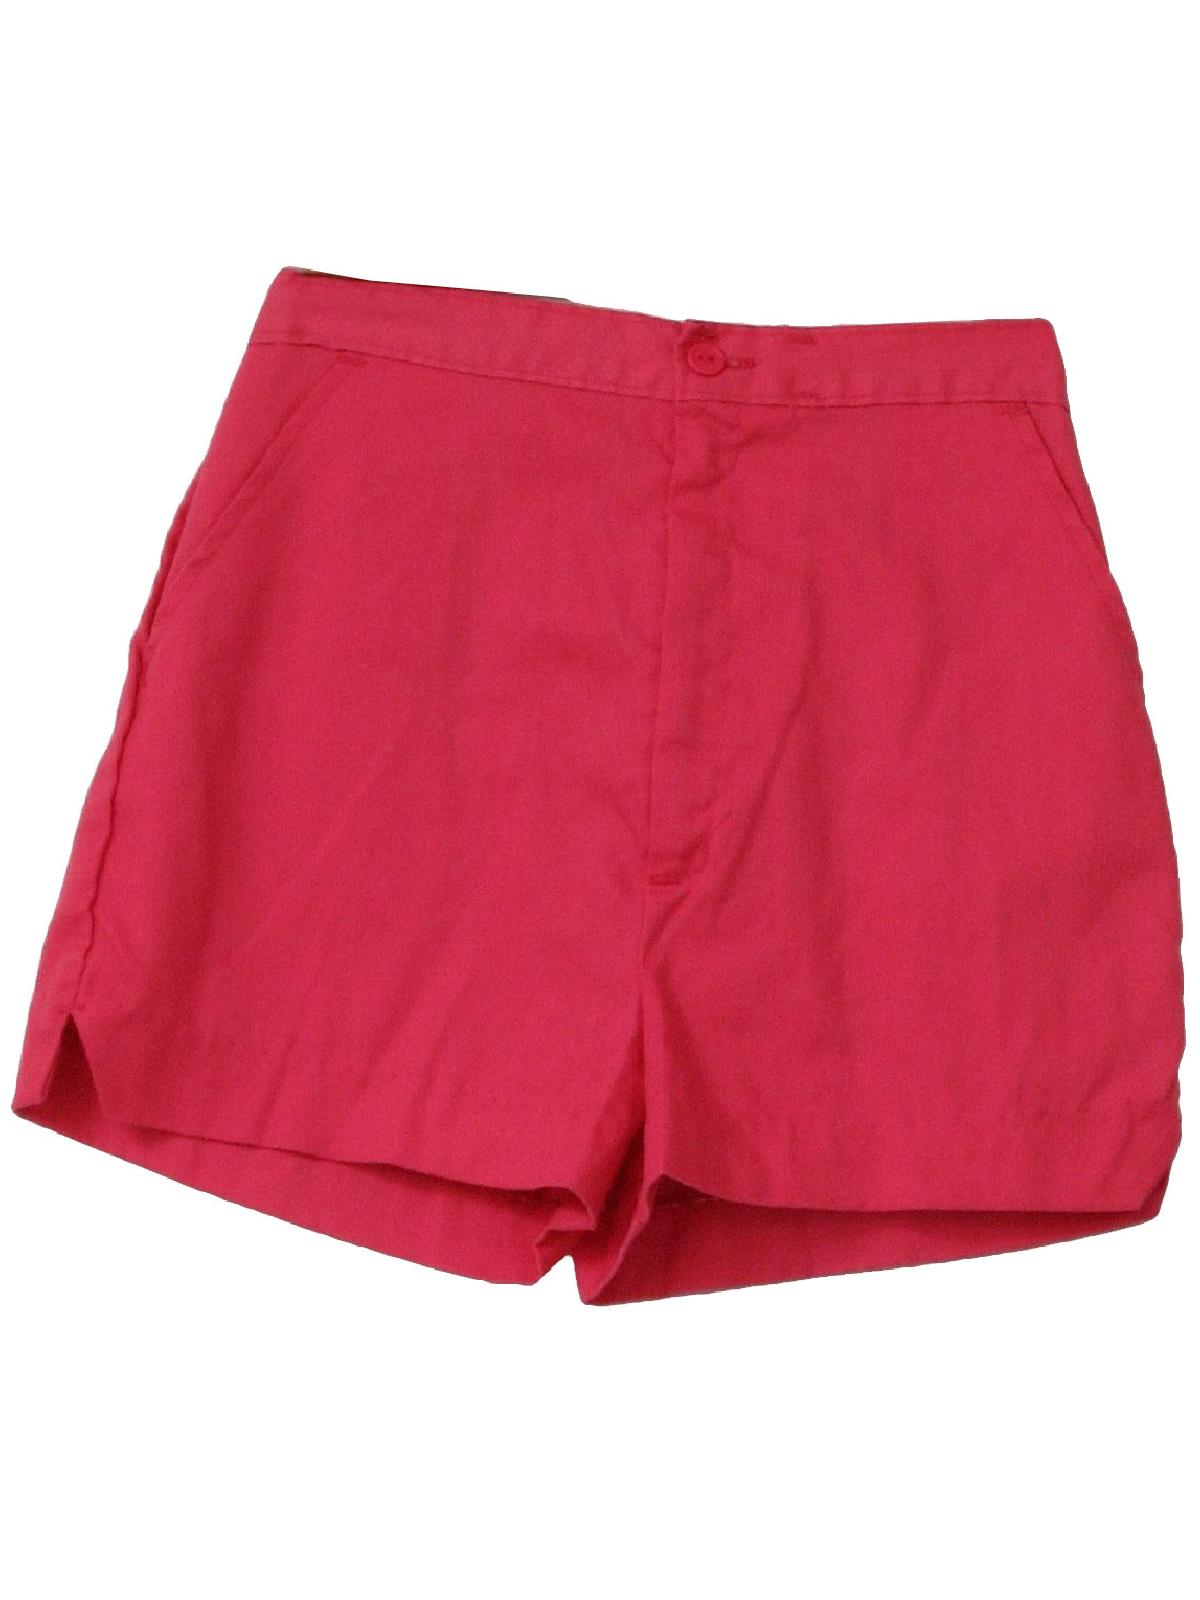 70s Vintage Care Label Shorts: 70s -Care Label- Womens pink polyester ...